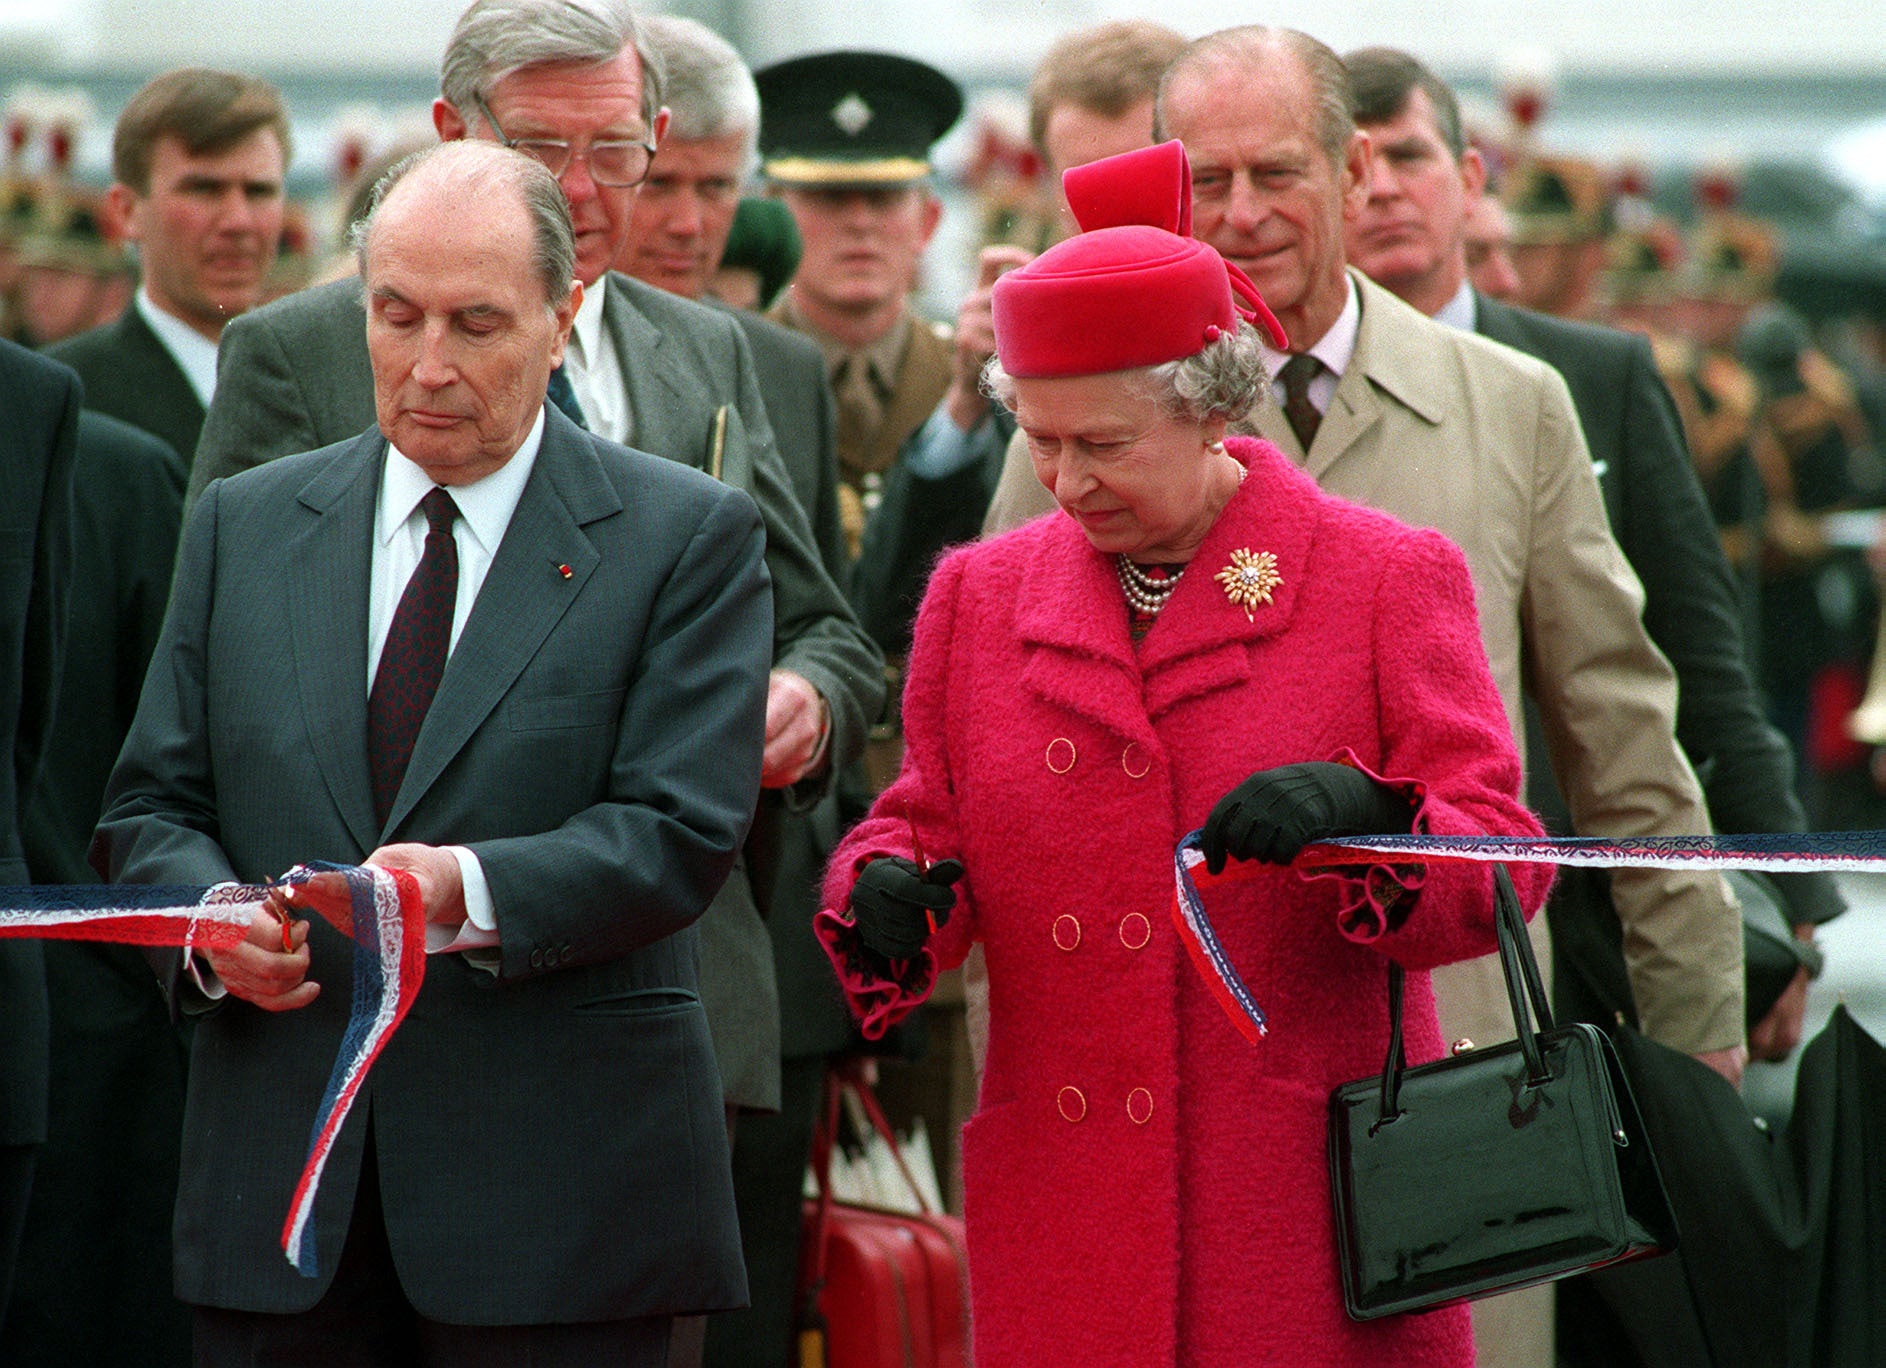 President Francois Mitterrand pictured with The Queen at the opening of the Channel Tunnel in 1994 (Tim Ockenden/PA)